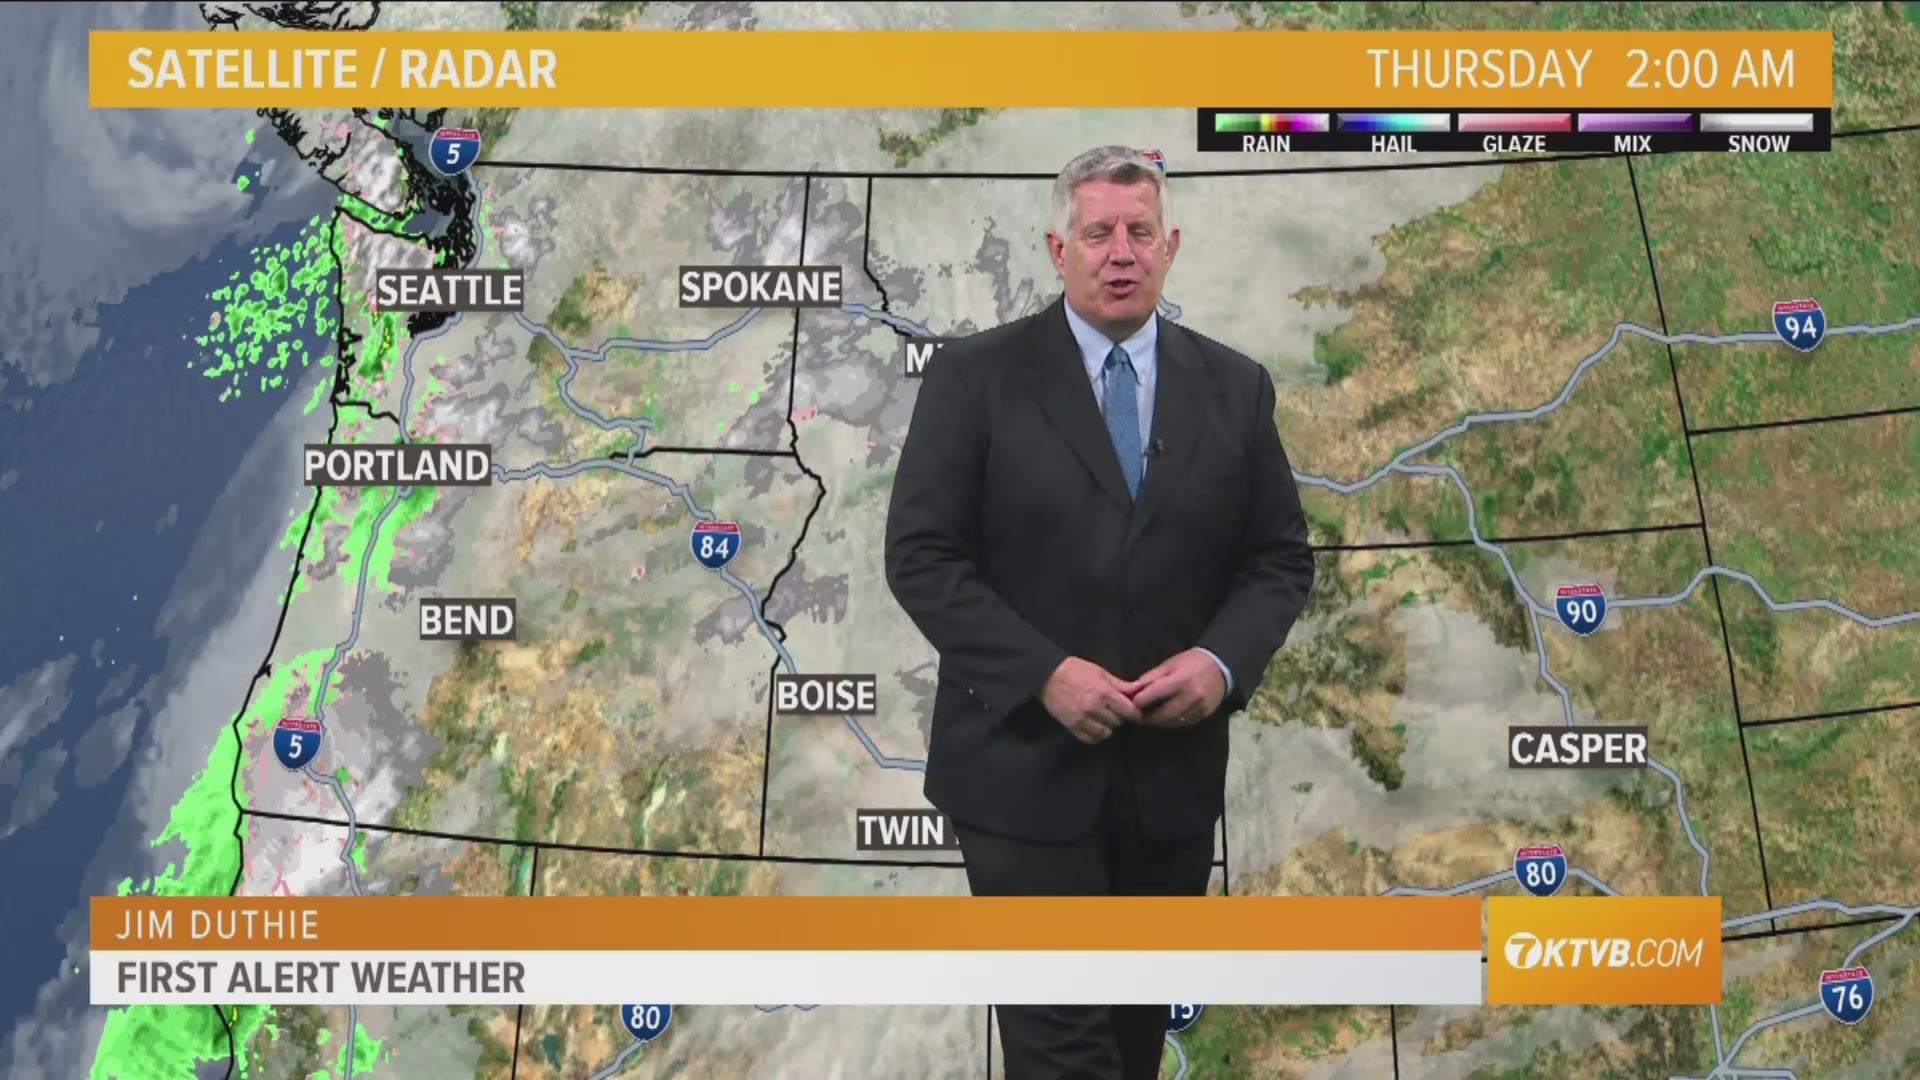 Jim Duthie says mild temperatures with highs in the mid-40s. Rain and snow showers in the evening.